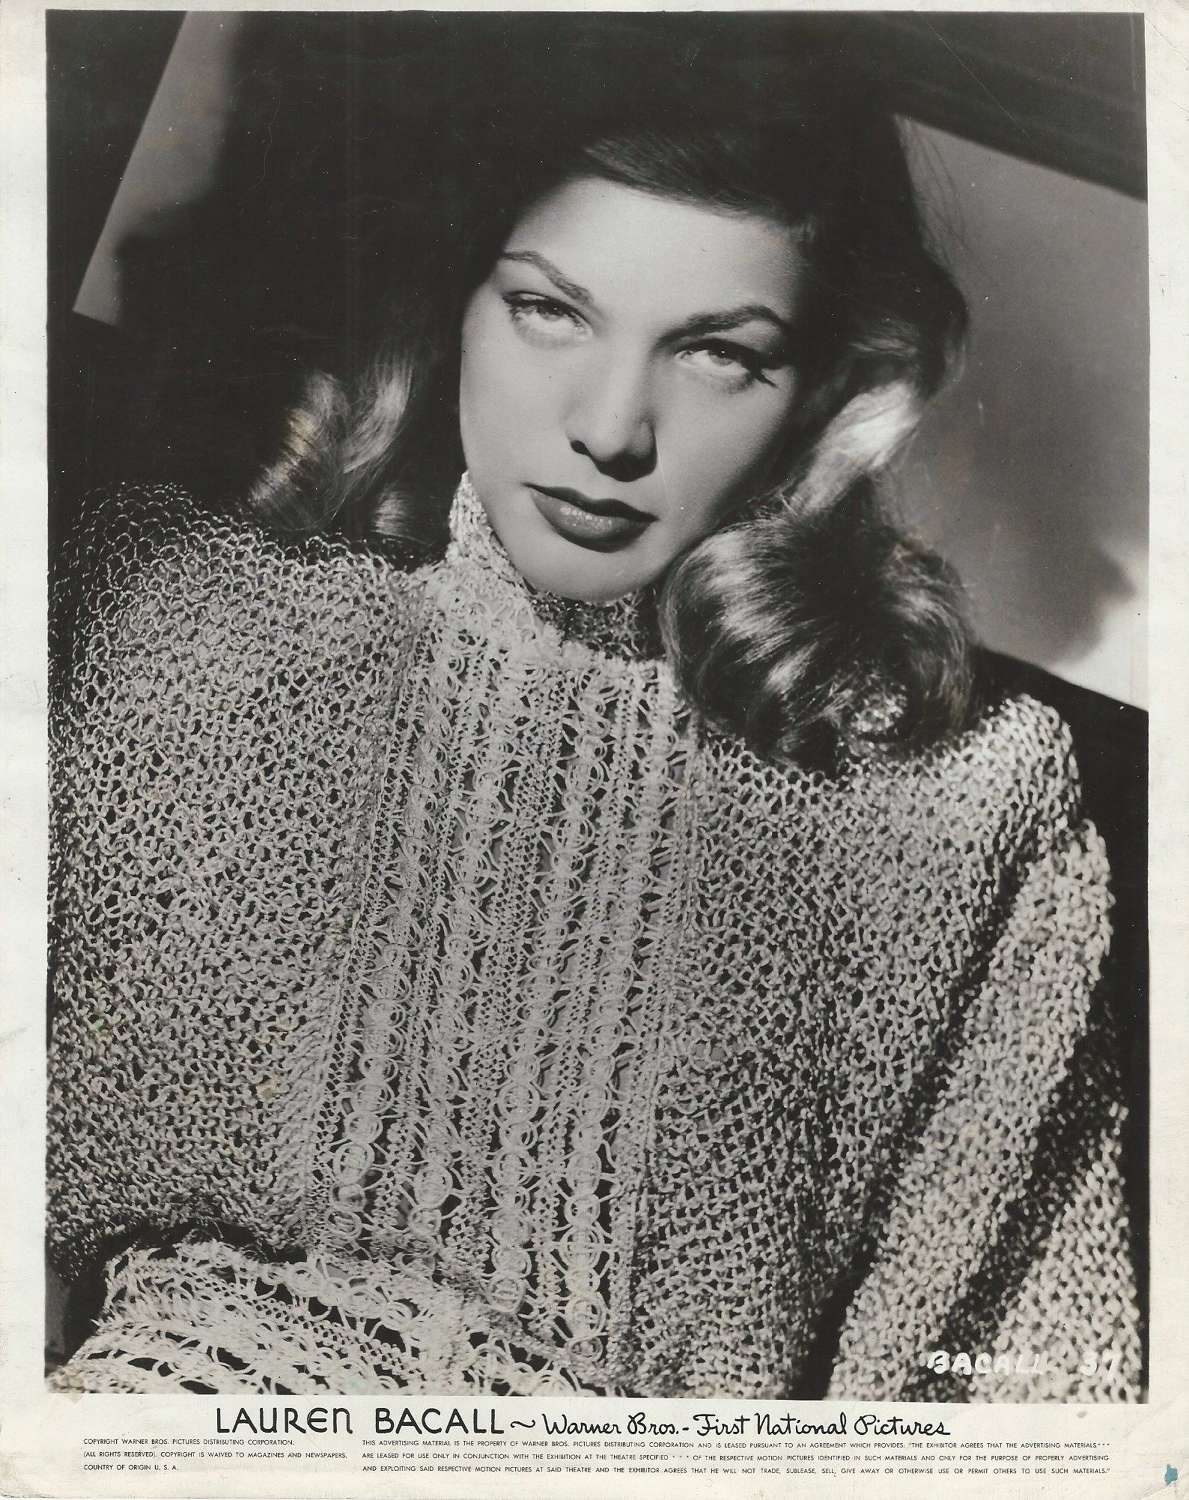 Lauren Bacall - Warner Brothers promotional photograph. C.1946